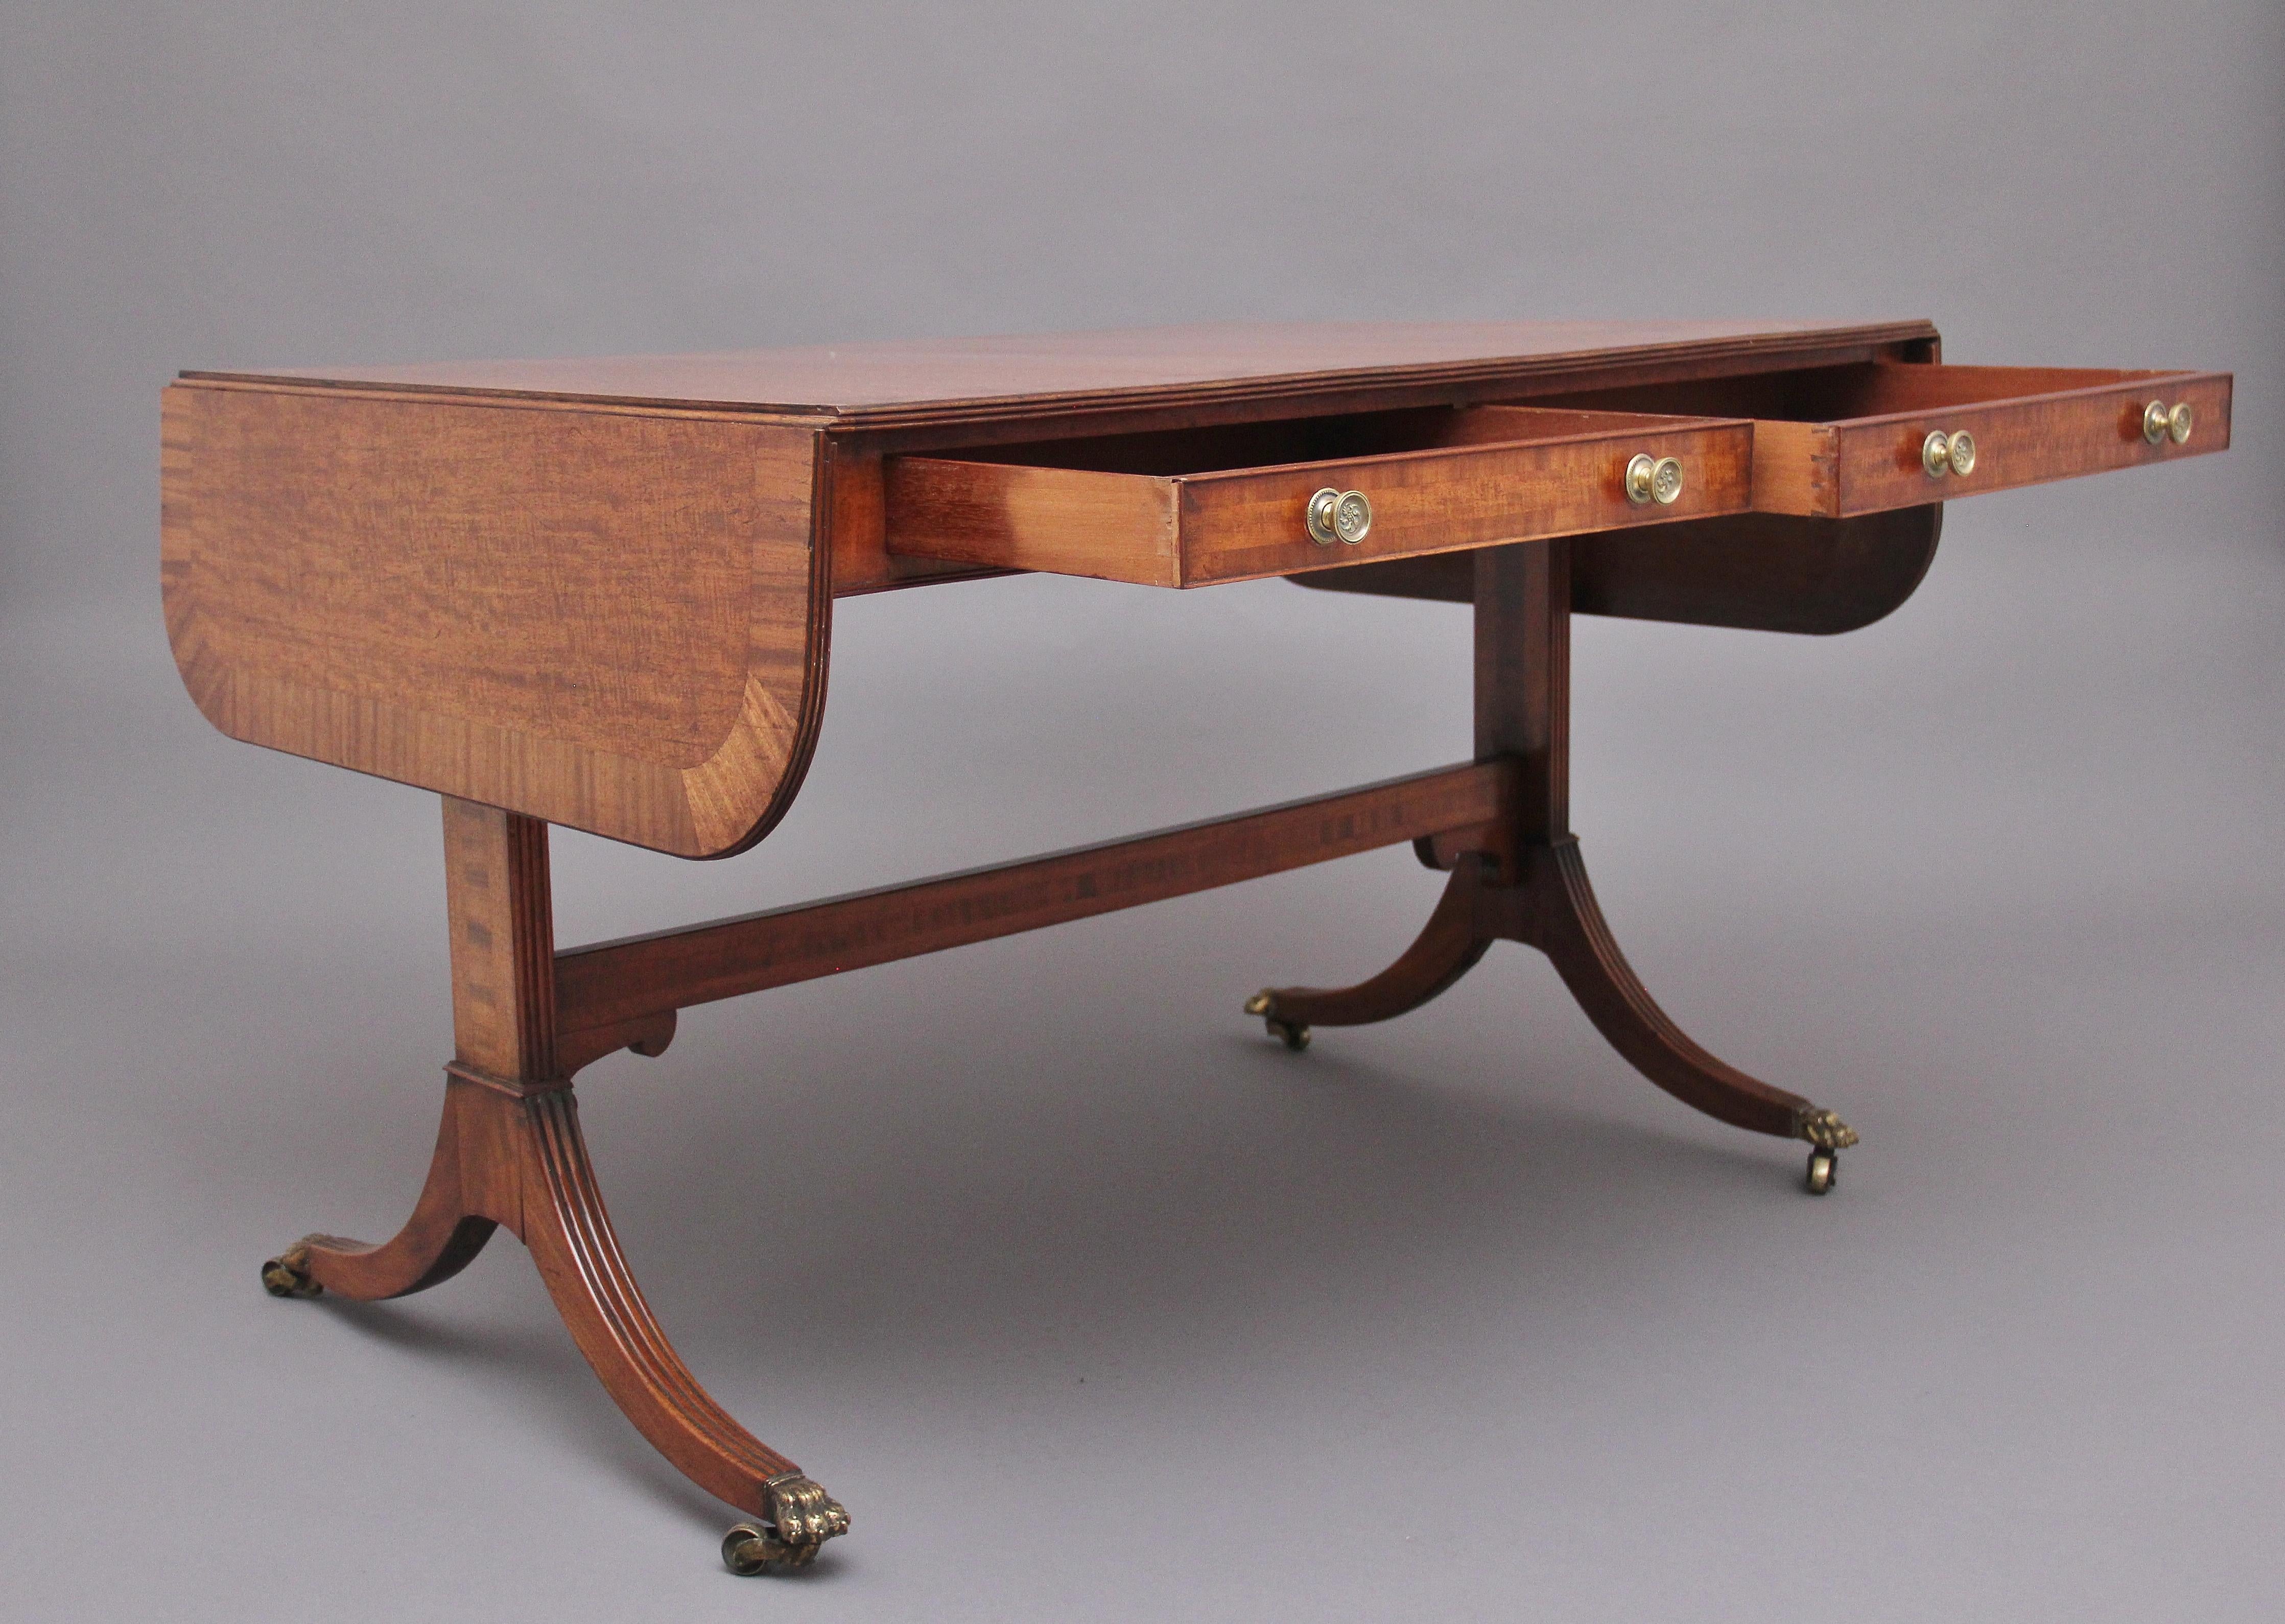 Early 19th century mahogany sofa table, having a lovely figured top which is crossbanded and having a reeded edge, having two drawers either side with engraved brass knob handles, the end supports united by an inlaid stretcher, standing on reeded